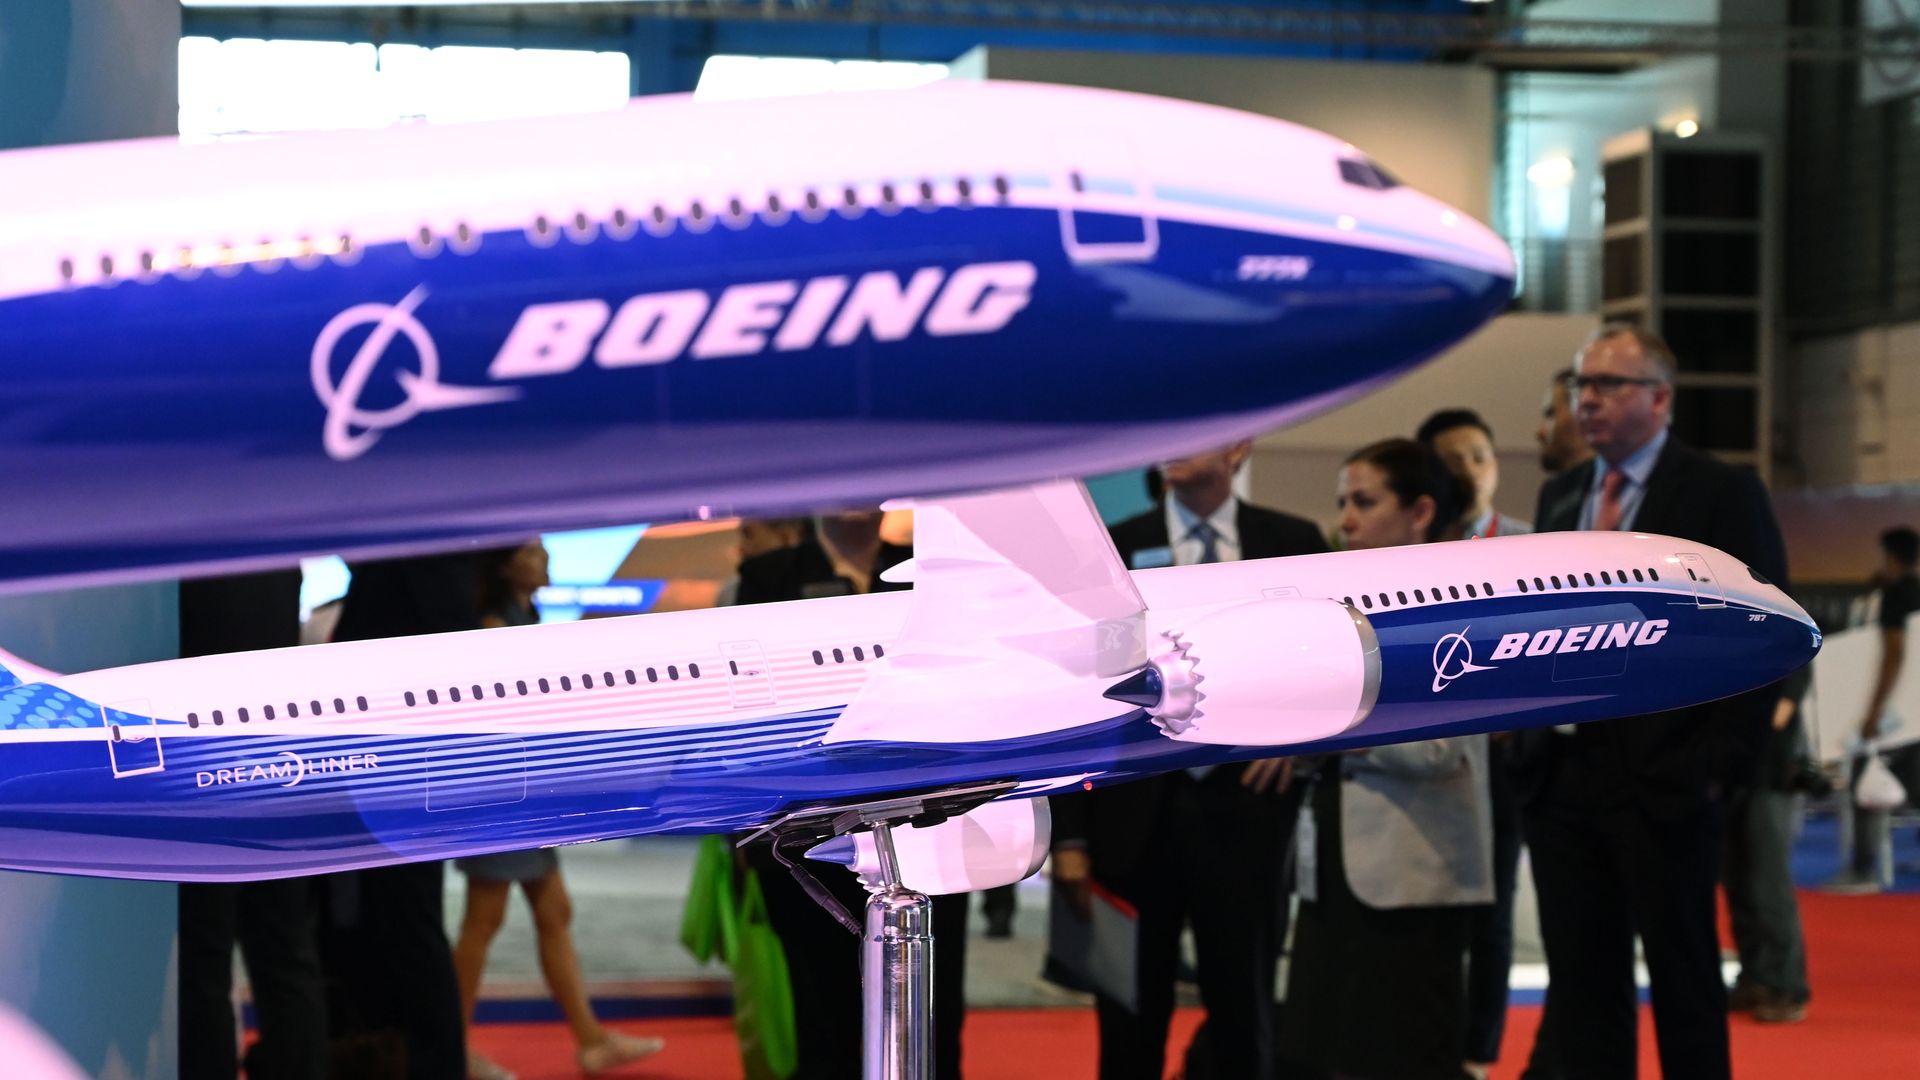 Two model Boeing planes 